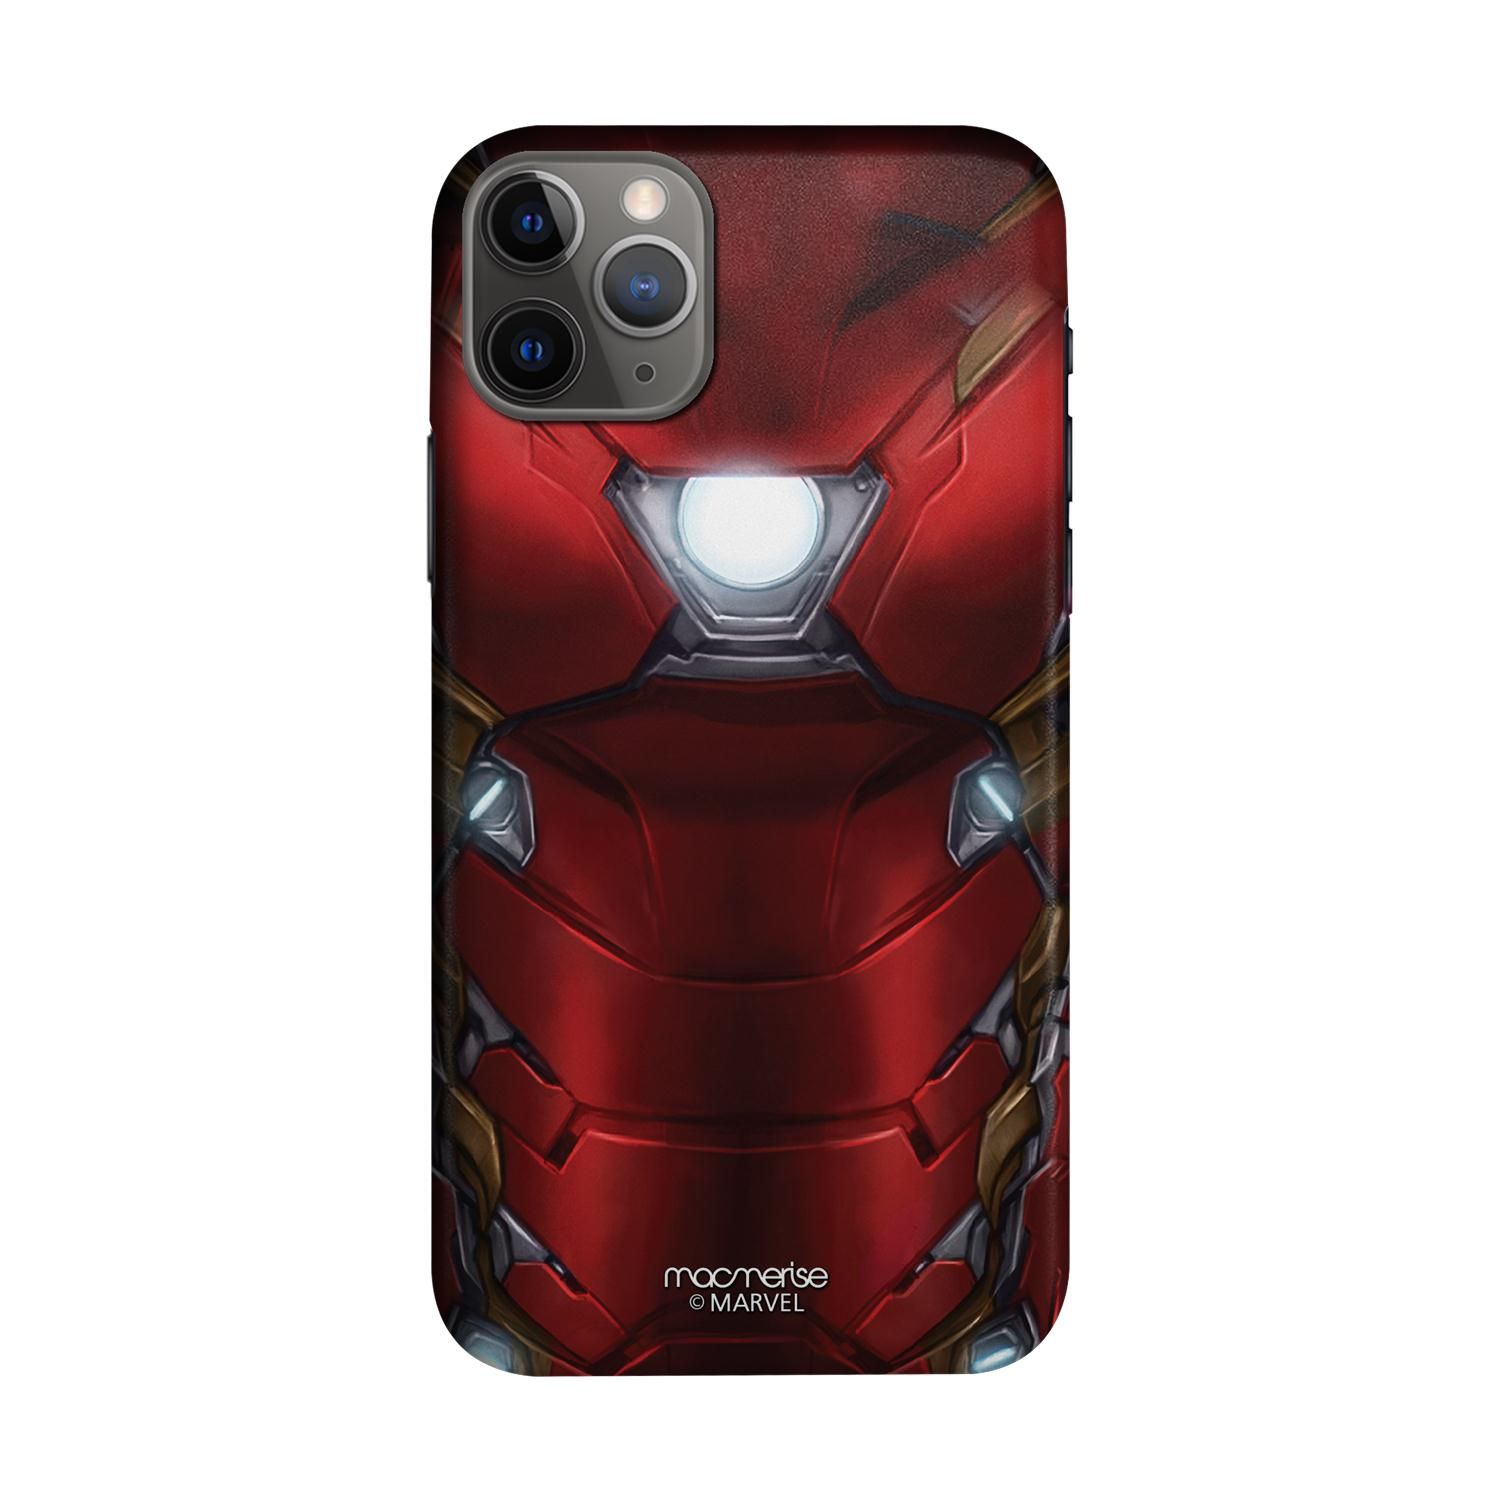 Suit up Ironman - Sleek Phone Case for iPhone 11 Pro Max